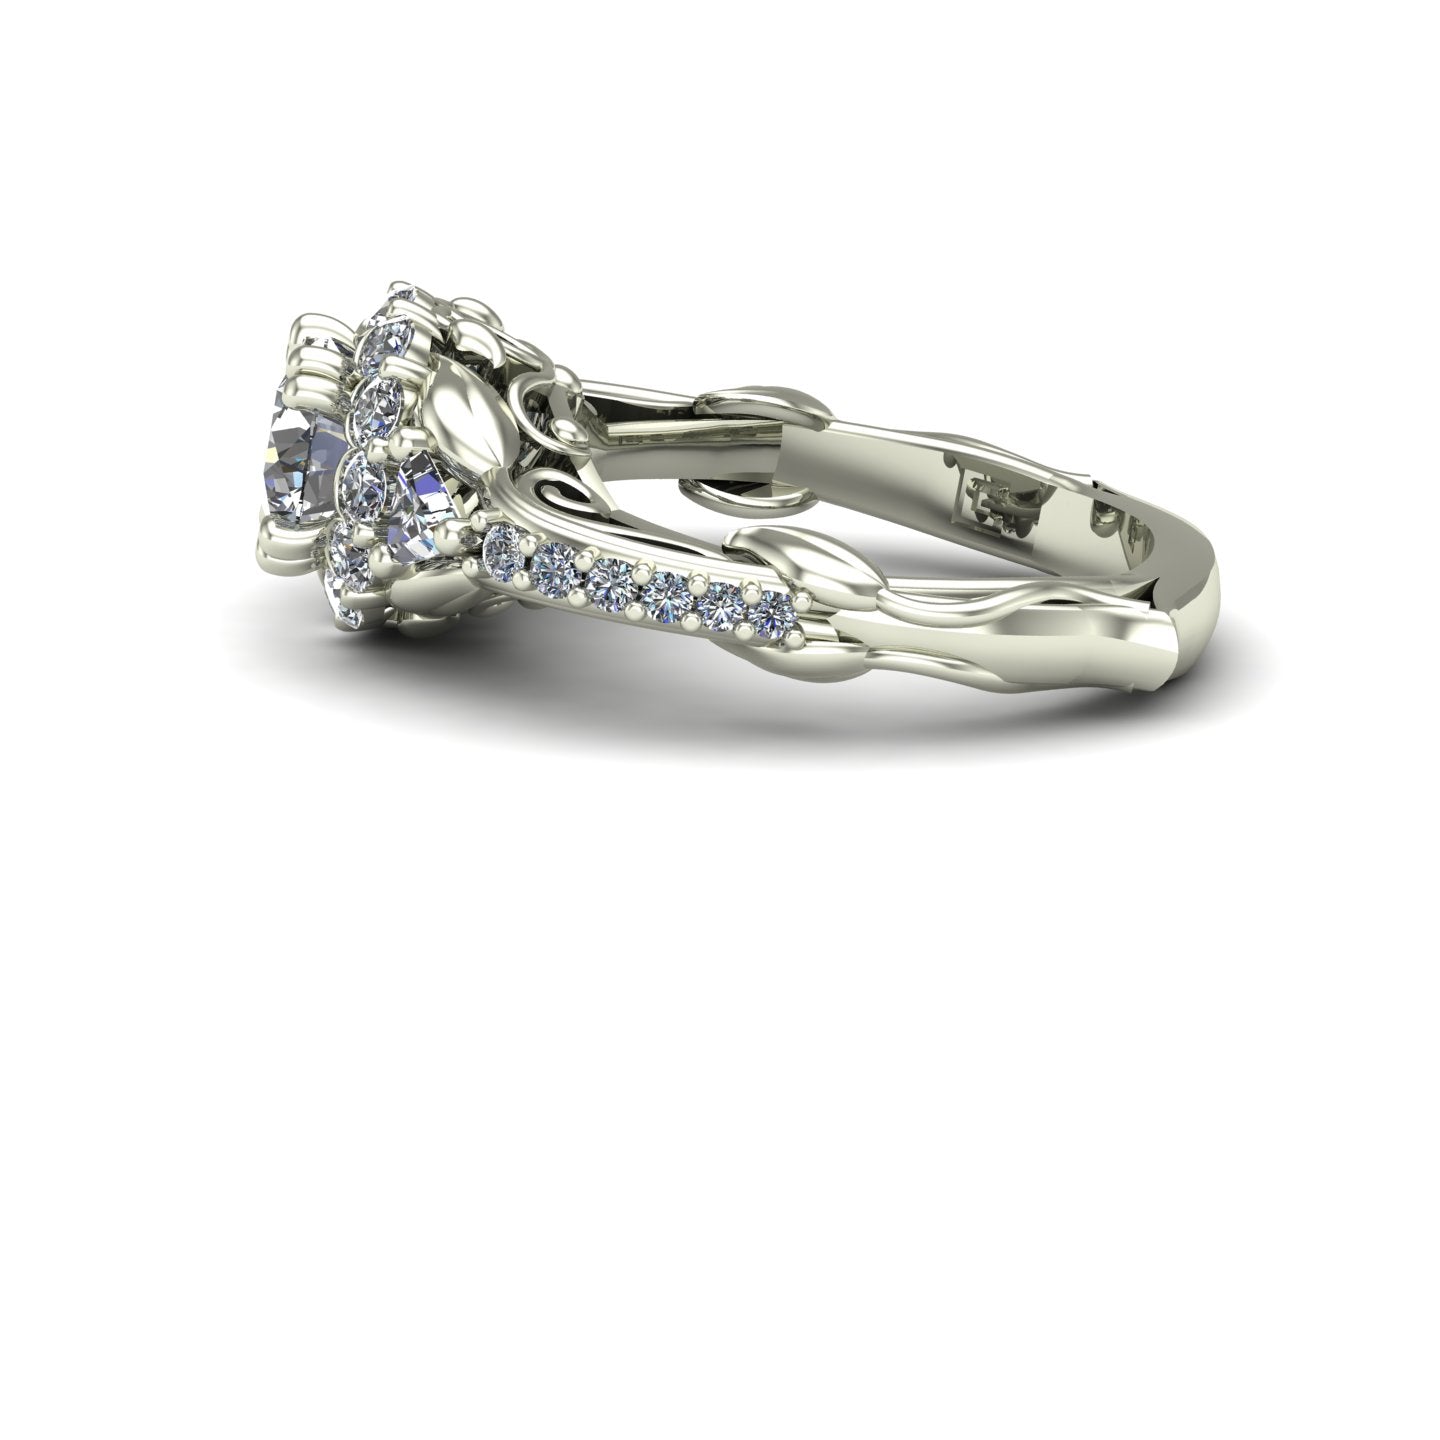 1ct diamond halo engagement ring with trillions and vines in 14k white gold - Charles Babb Designs - side view